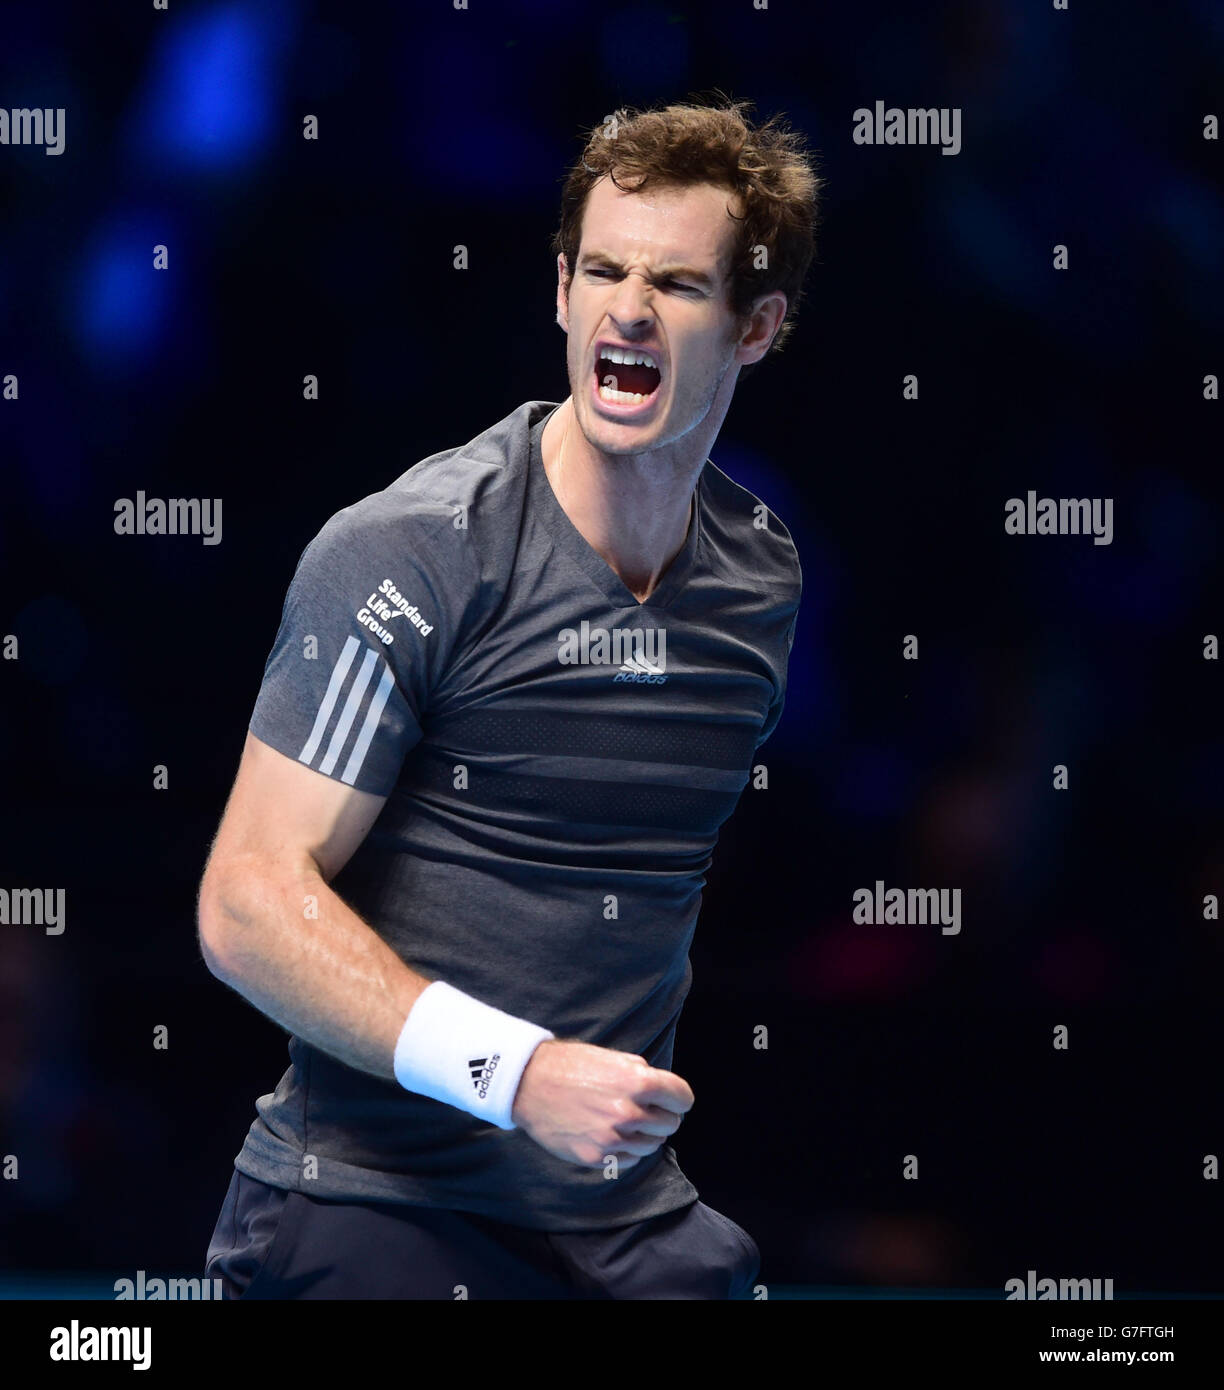 Great Britain's Andy Murray celebrates his win over Canada's Milos Raonic during the Barclays ATP World Tour Finals at The O2 Arena, London. PRESS ASSOCIATION Photo. Picture date: Tuesday November 11, 2014. See PA story TENNIS London. Photo credit should read Adam Davy/PA Wire. Stock Photo